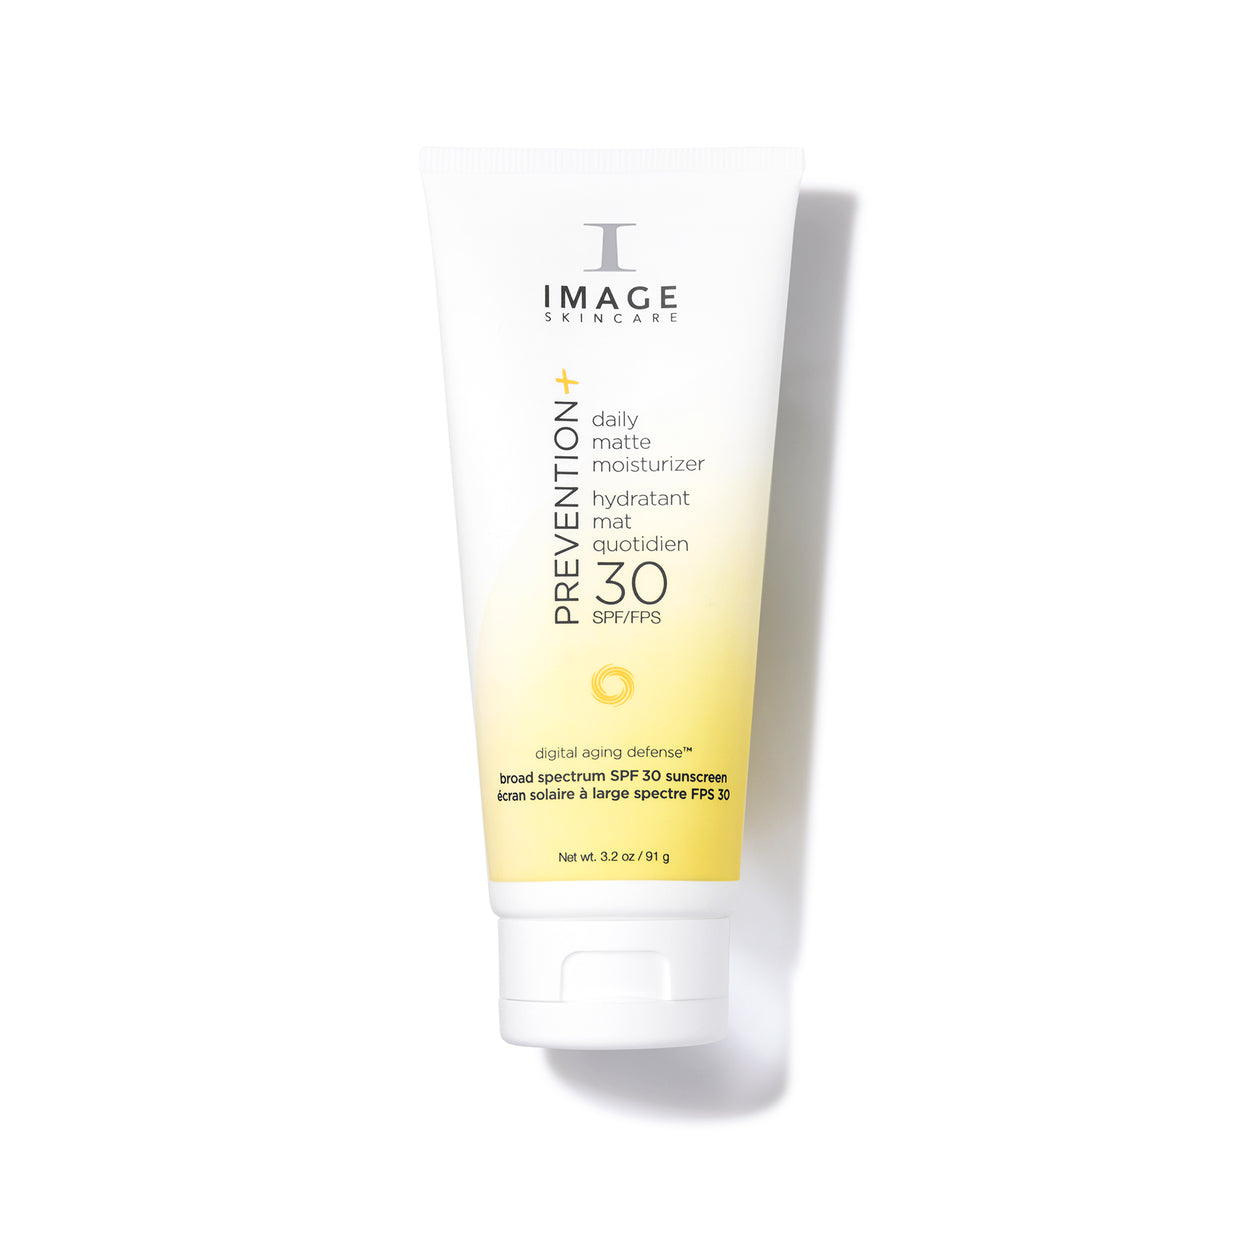 Image Skincare Prevention+ Daily Matte Moisturizer SPF 30 Shop At Exclusive Beauty